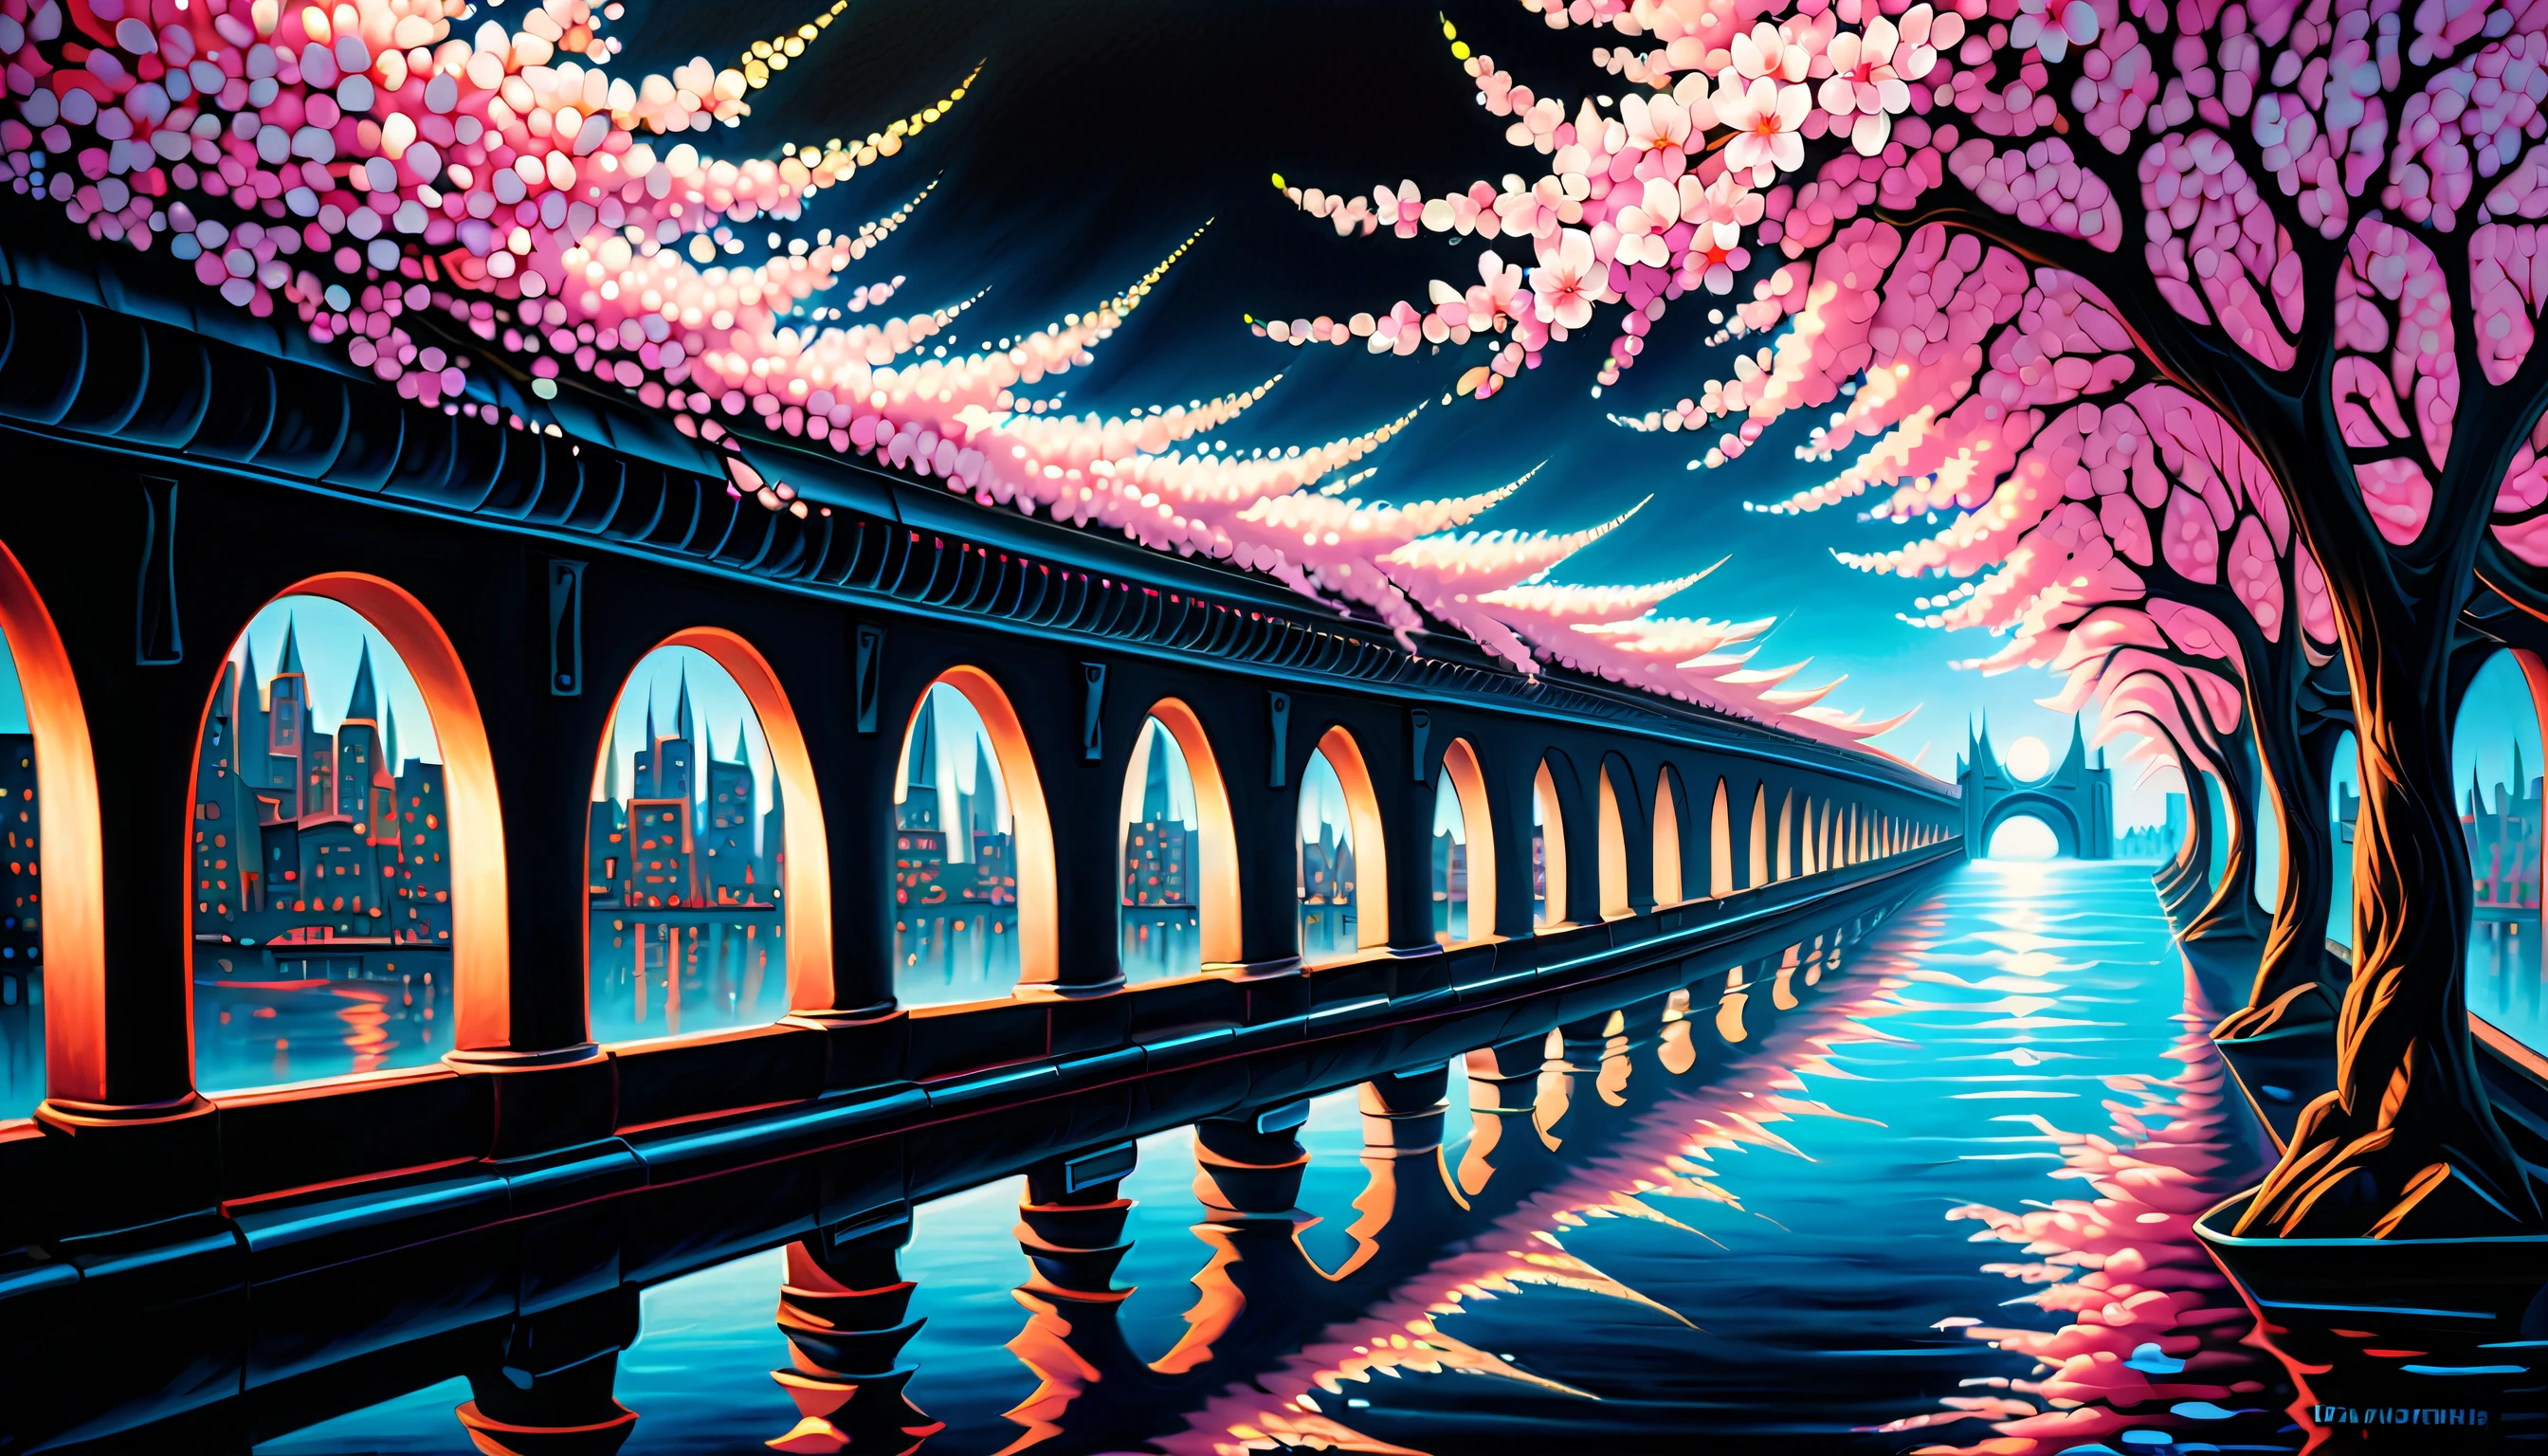 (((image of stunning underwater world tunnel lined with glowing cherry blossom trees:1.3))), (tachism:1.3), sharks and rays swim, use of a black rendering technique, adds mysterious and realistic touch, (((future cityscape background intricate detail:1.2))), (((matte paint:1.5))), use of futuristic technology and luminescent paint, creates a mesmerizing and intricate beauty, strokes are so precise and detailed, (((stunning intricate detail official art:1.3))), luminescent paint and intricate details create a mesmerizing and ethereal beauty, touch of magic and wonder, (((ultimate real detail gouache and mezzotint:1.5))), (((reality and fantasy blend seamlessly:1.3))), (((true masterpiece:1.3))), (((radiosity rendered in stunning 32k resolution beauty:1.3))), (((extremely insane detail:1.3))), (((crisp clarity unmatched:1.4))), chiaroscuro, (high contrast:1.3), (((masterpiece:1.4))),